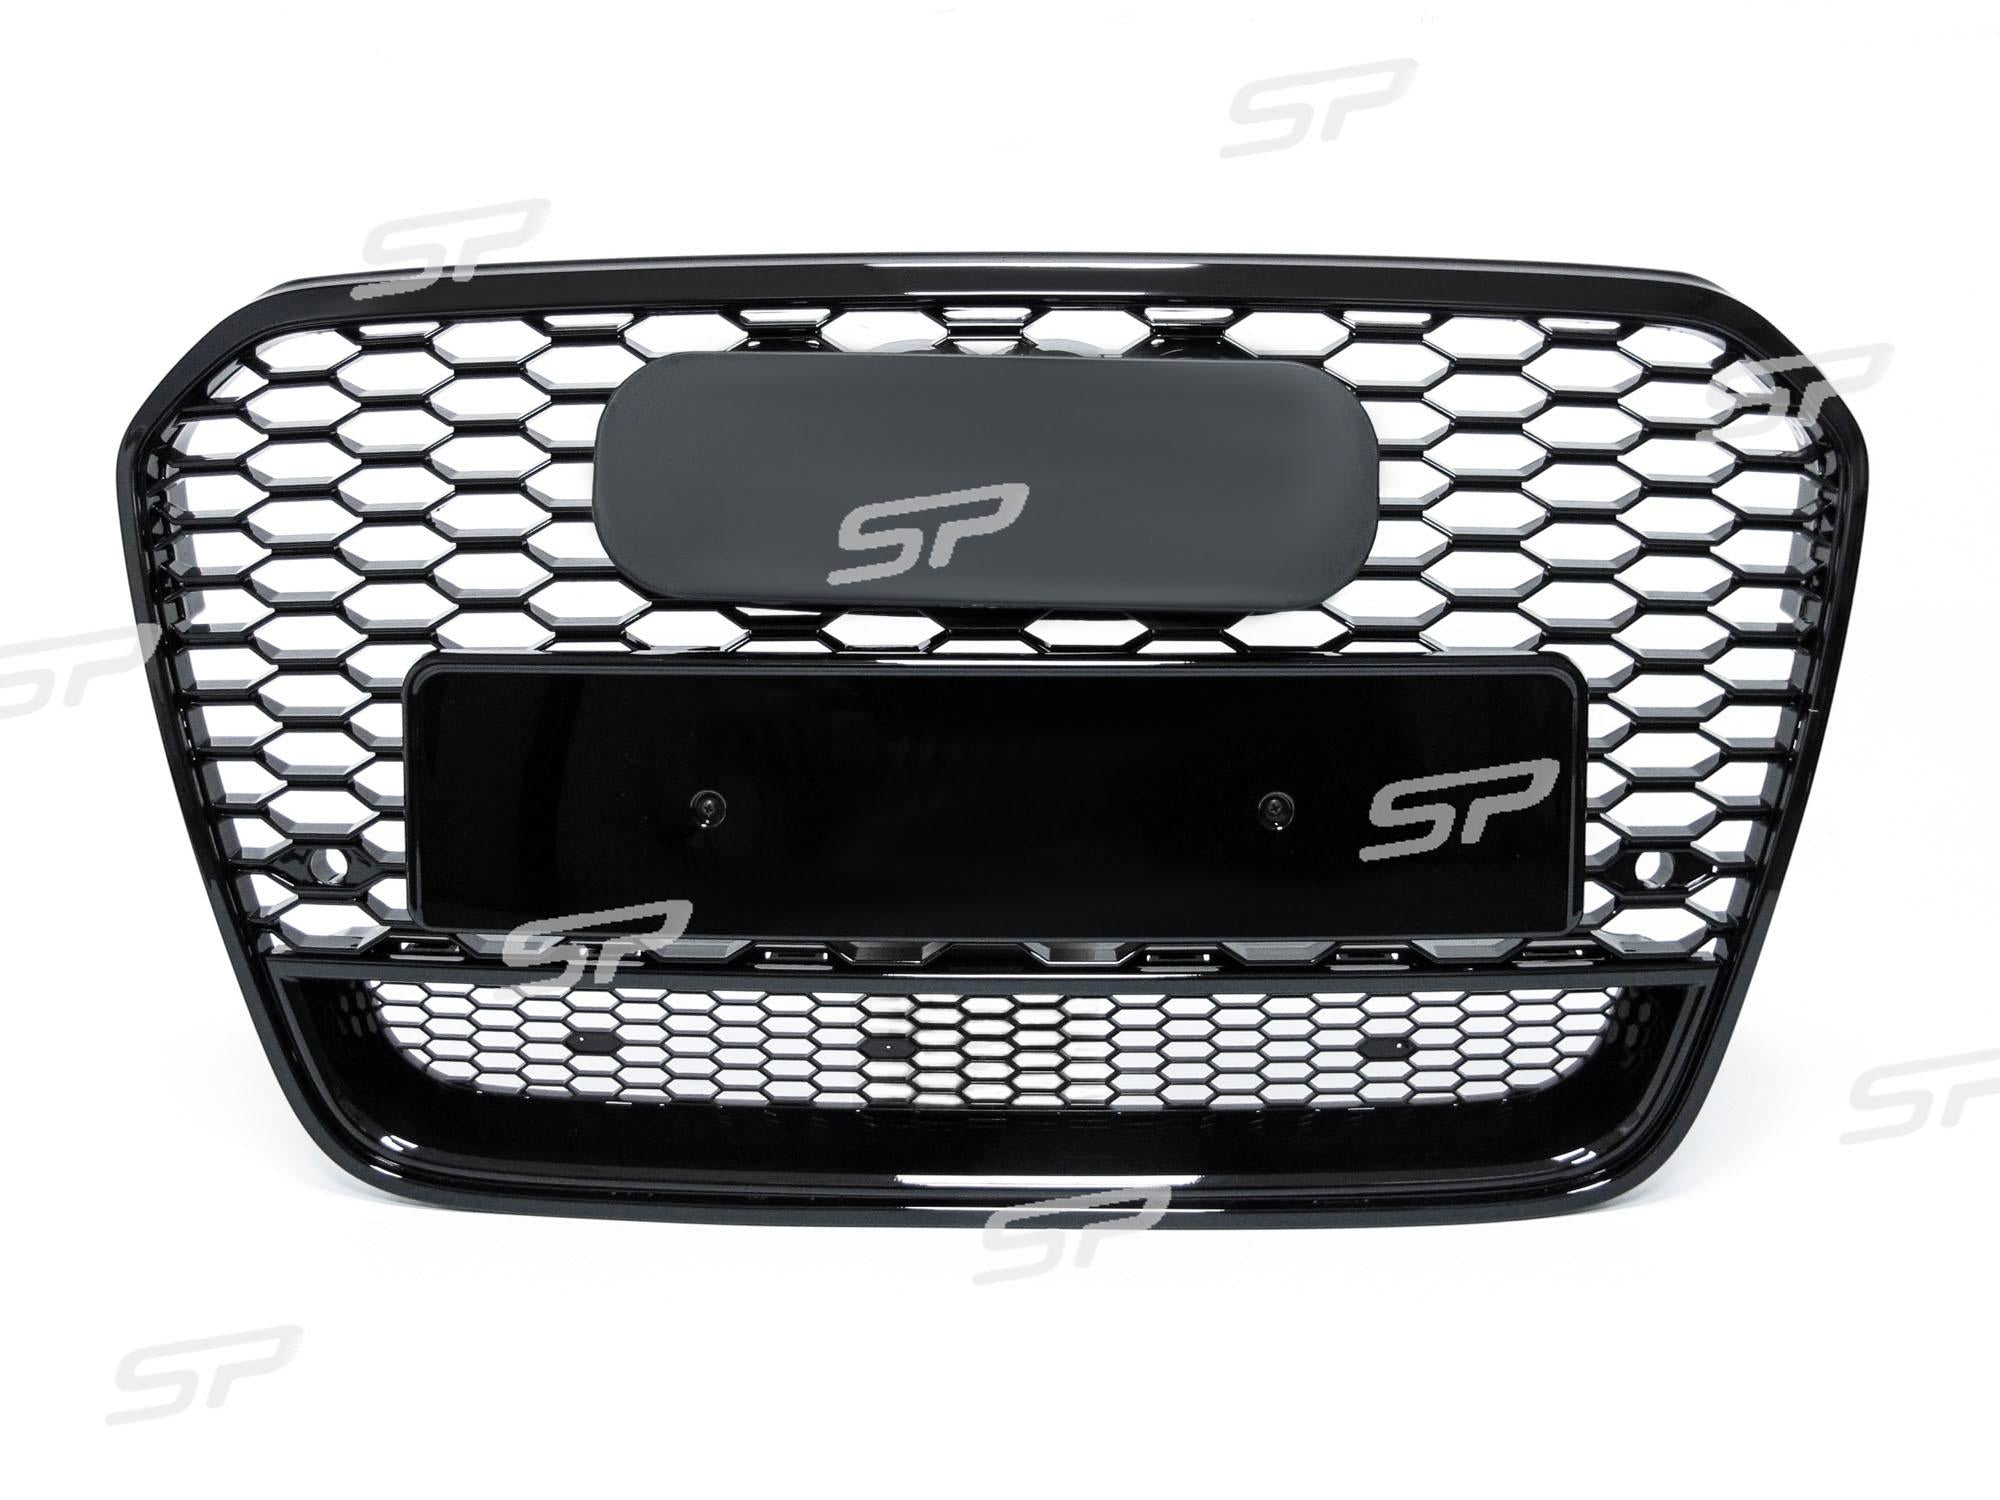 Wabengrill Kühlergrill Grill Schwarz RS6 Style für AUDI A6 S6 C7 4G S6 S Line Limo Avant 2011-2014